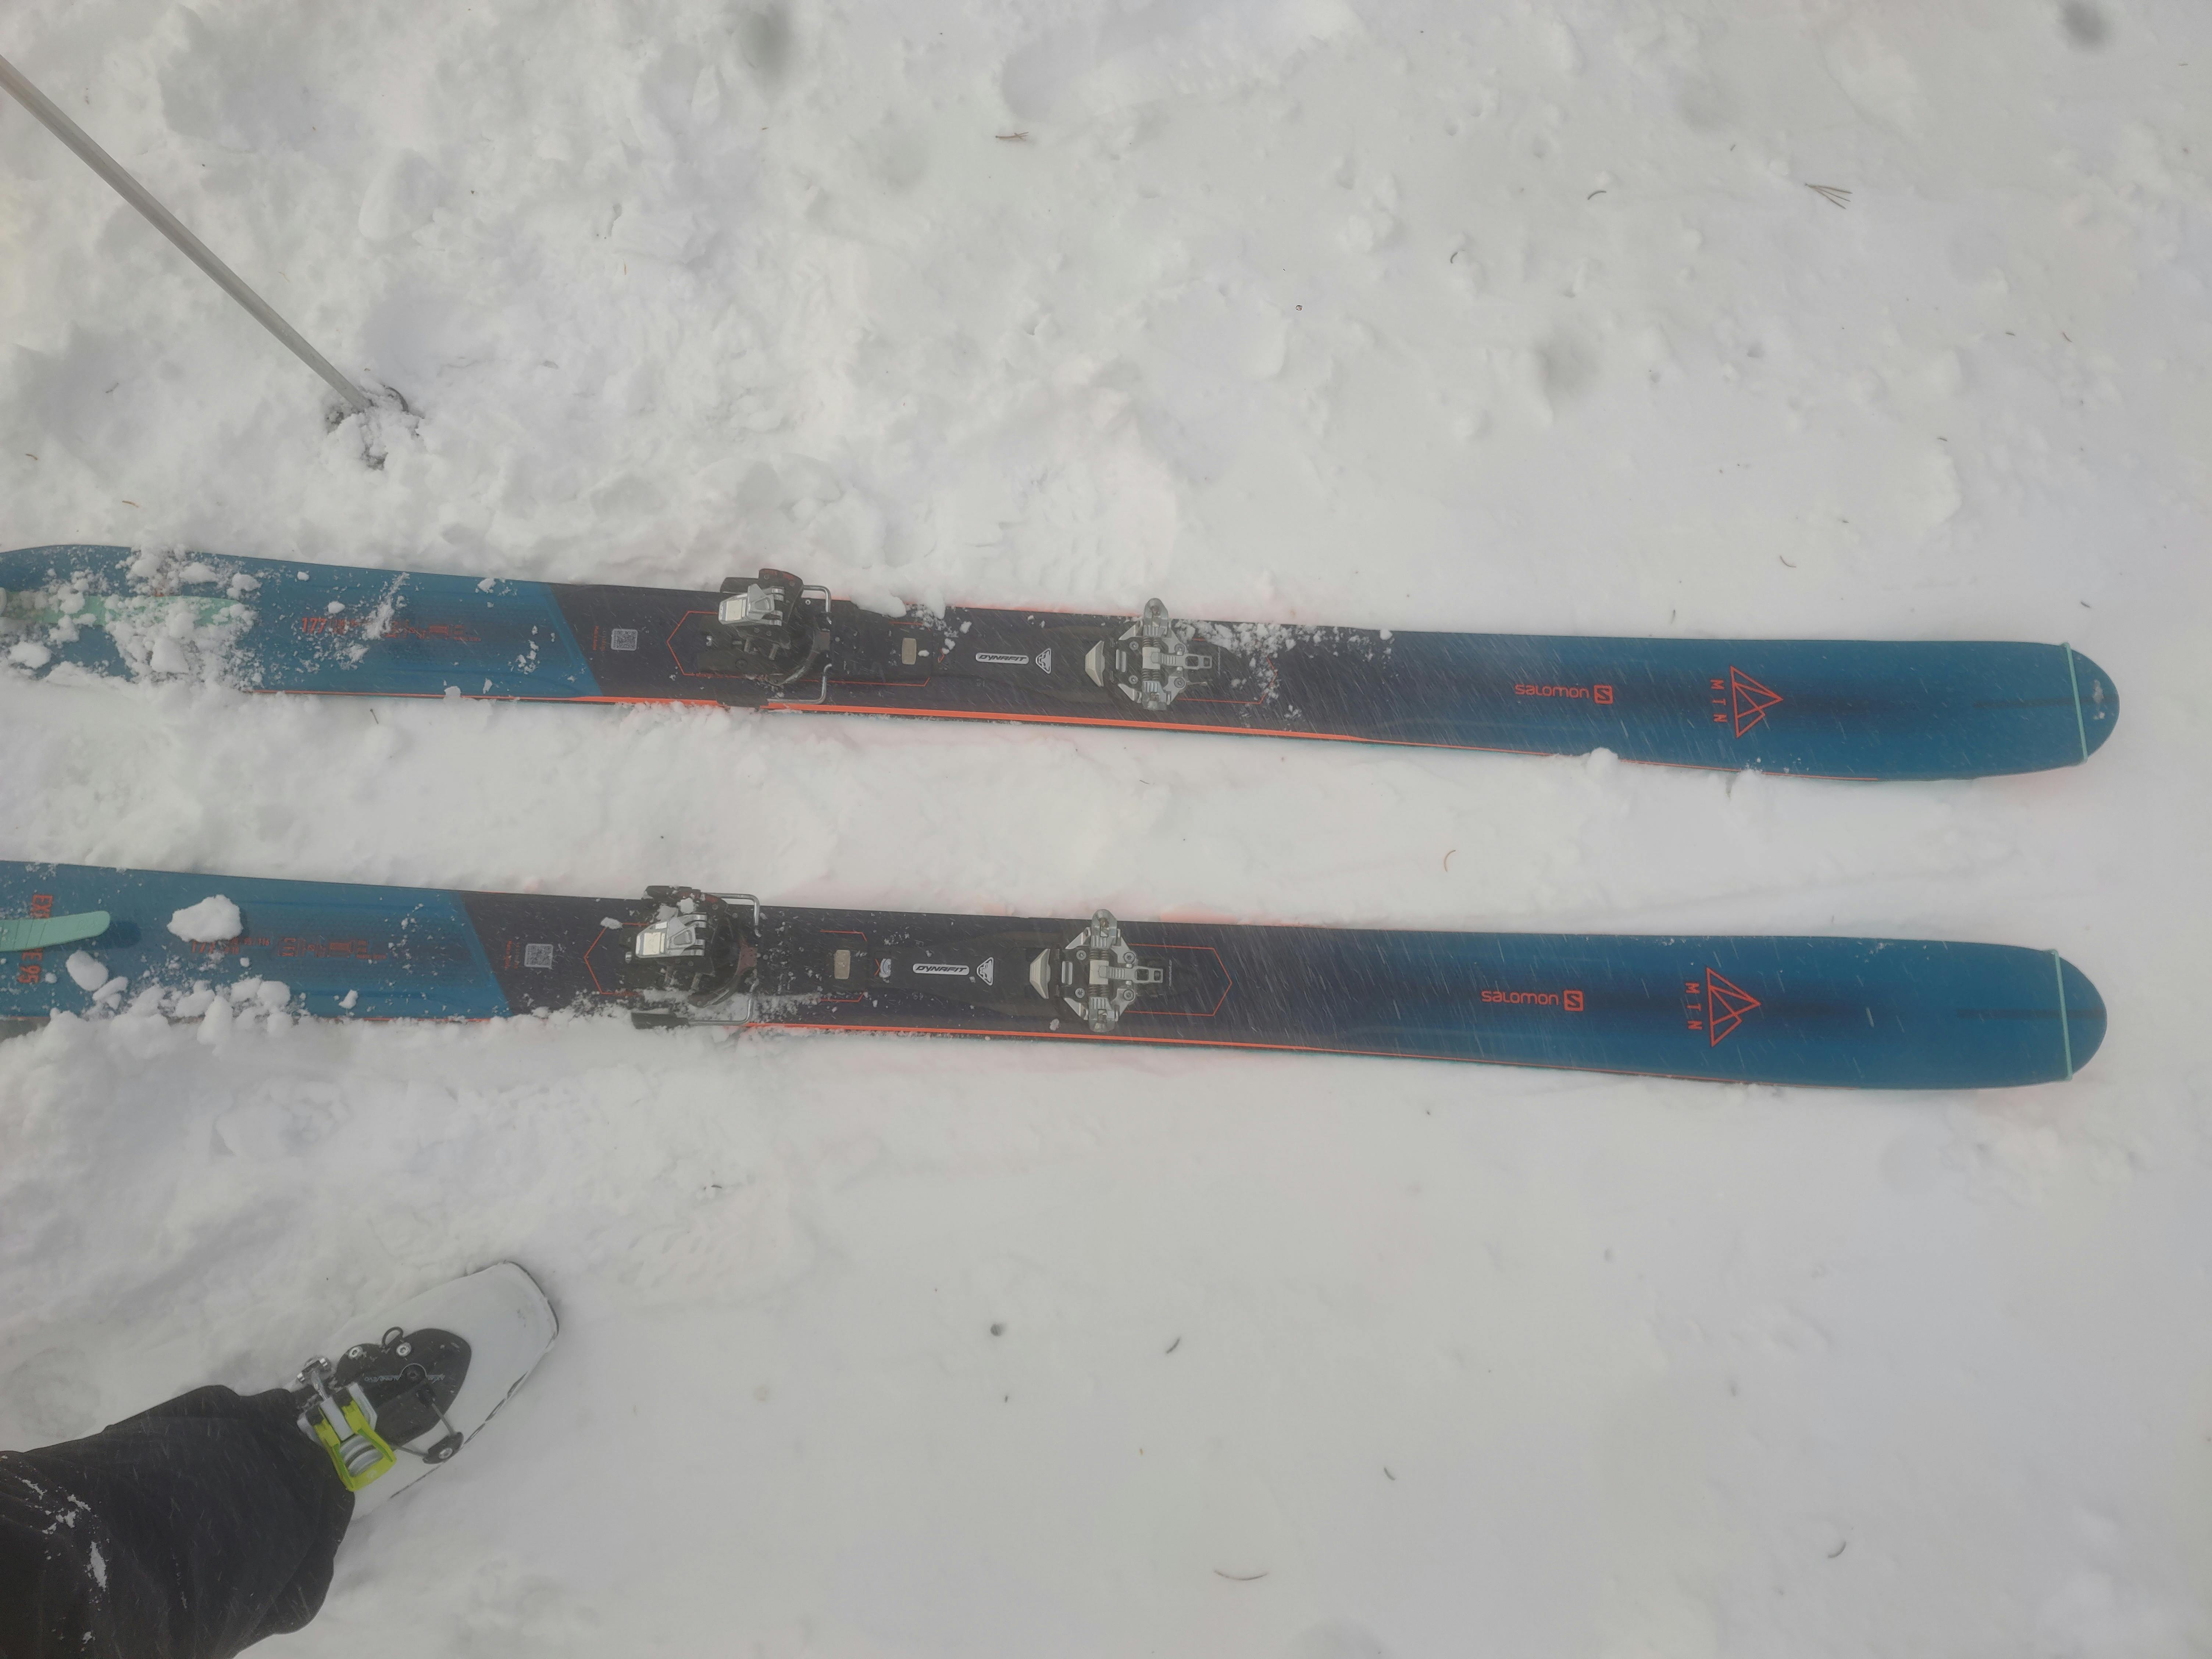 Top down view of the Salomon MTN skis. 